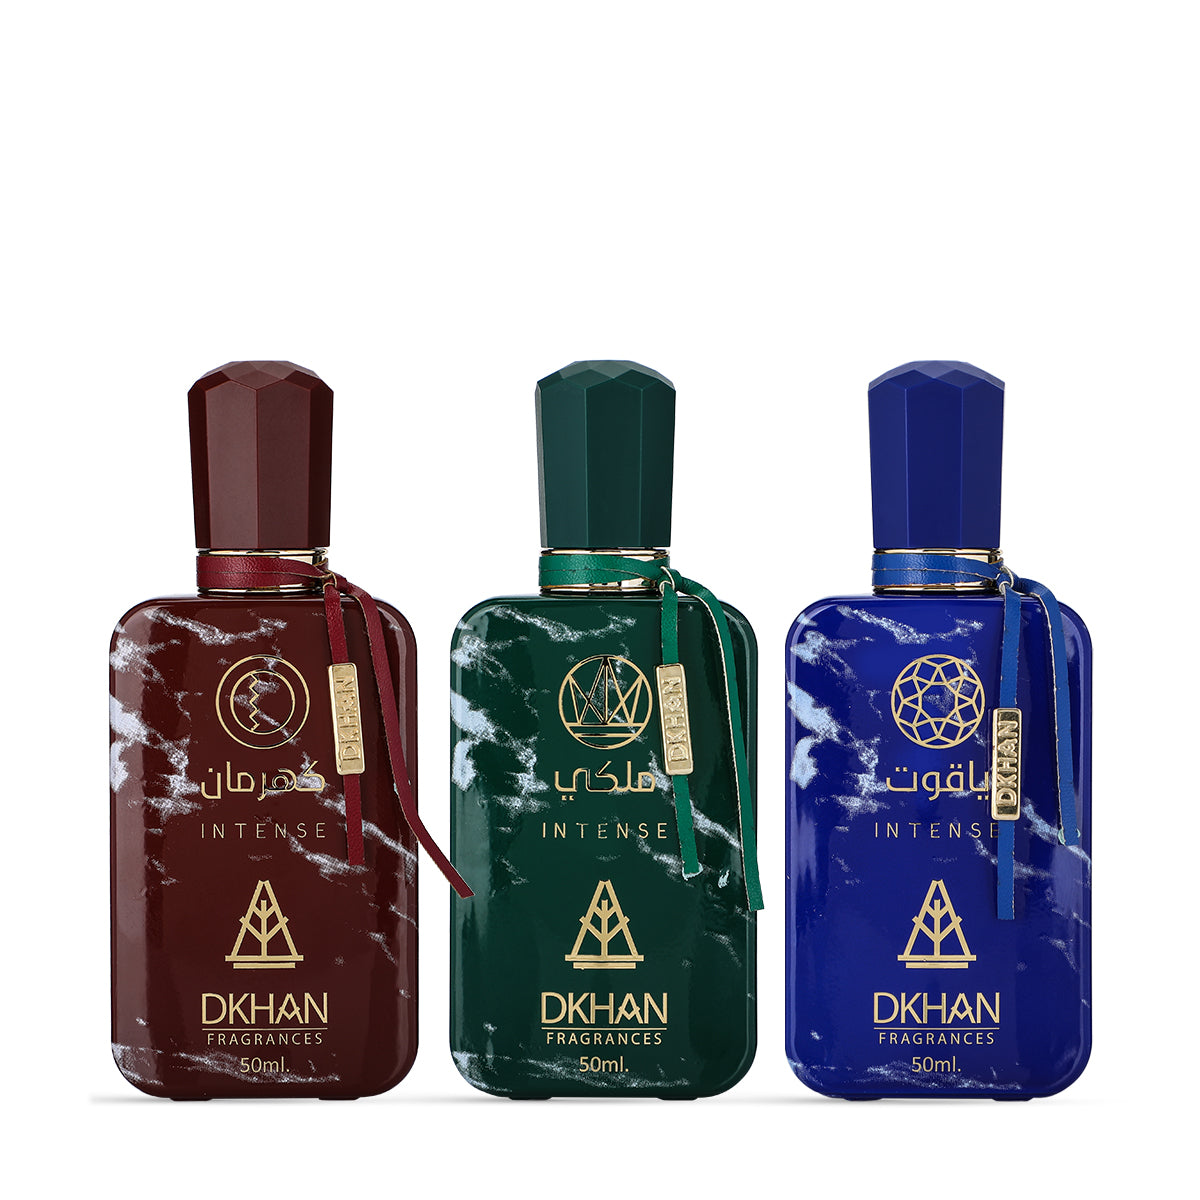 This image features a set of three distinct perfume bottles from DKHAN Fragrances, each containing 50ml of Eau de Parfum. From left to right: the first bottle is maroon with a matching geometric cap and a gold tag, the second bottle is emerald green with a gold tag, and the third is cobalt blue with a gold tag. Each bottle has a marbled effect and is adorned with the DKHAN logo and 'INTENSE' in gold lettering, along with the brand's emblem, a heart within a diamond shape.